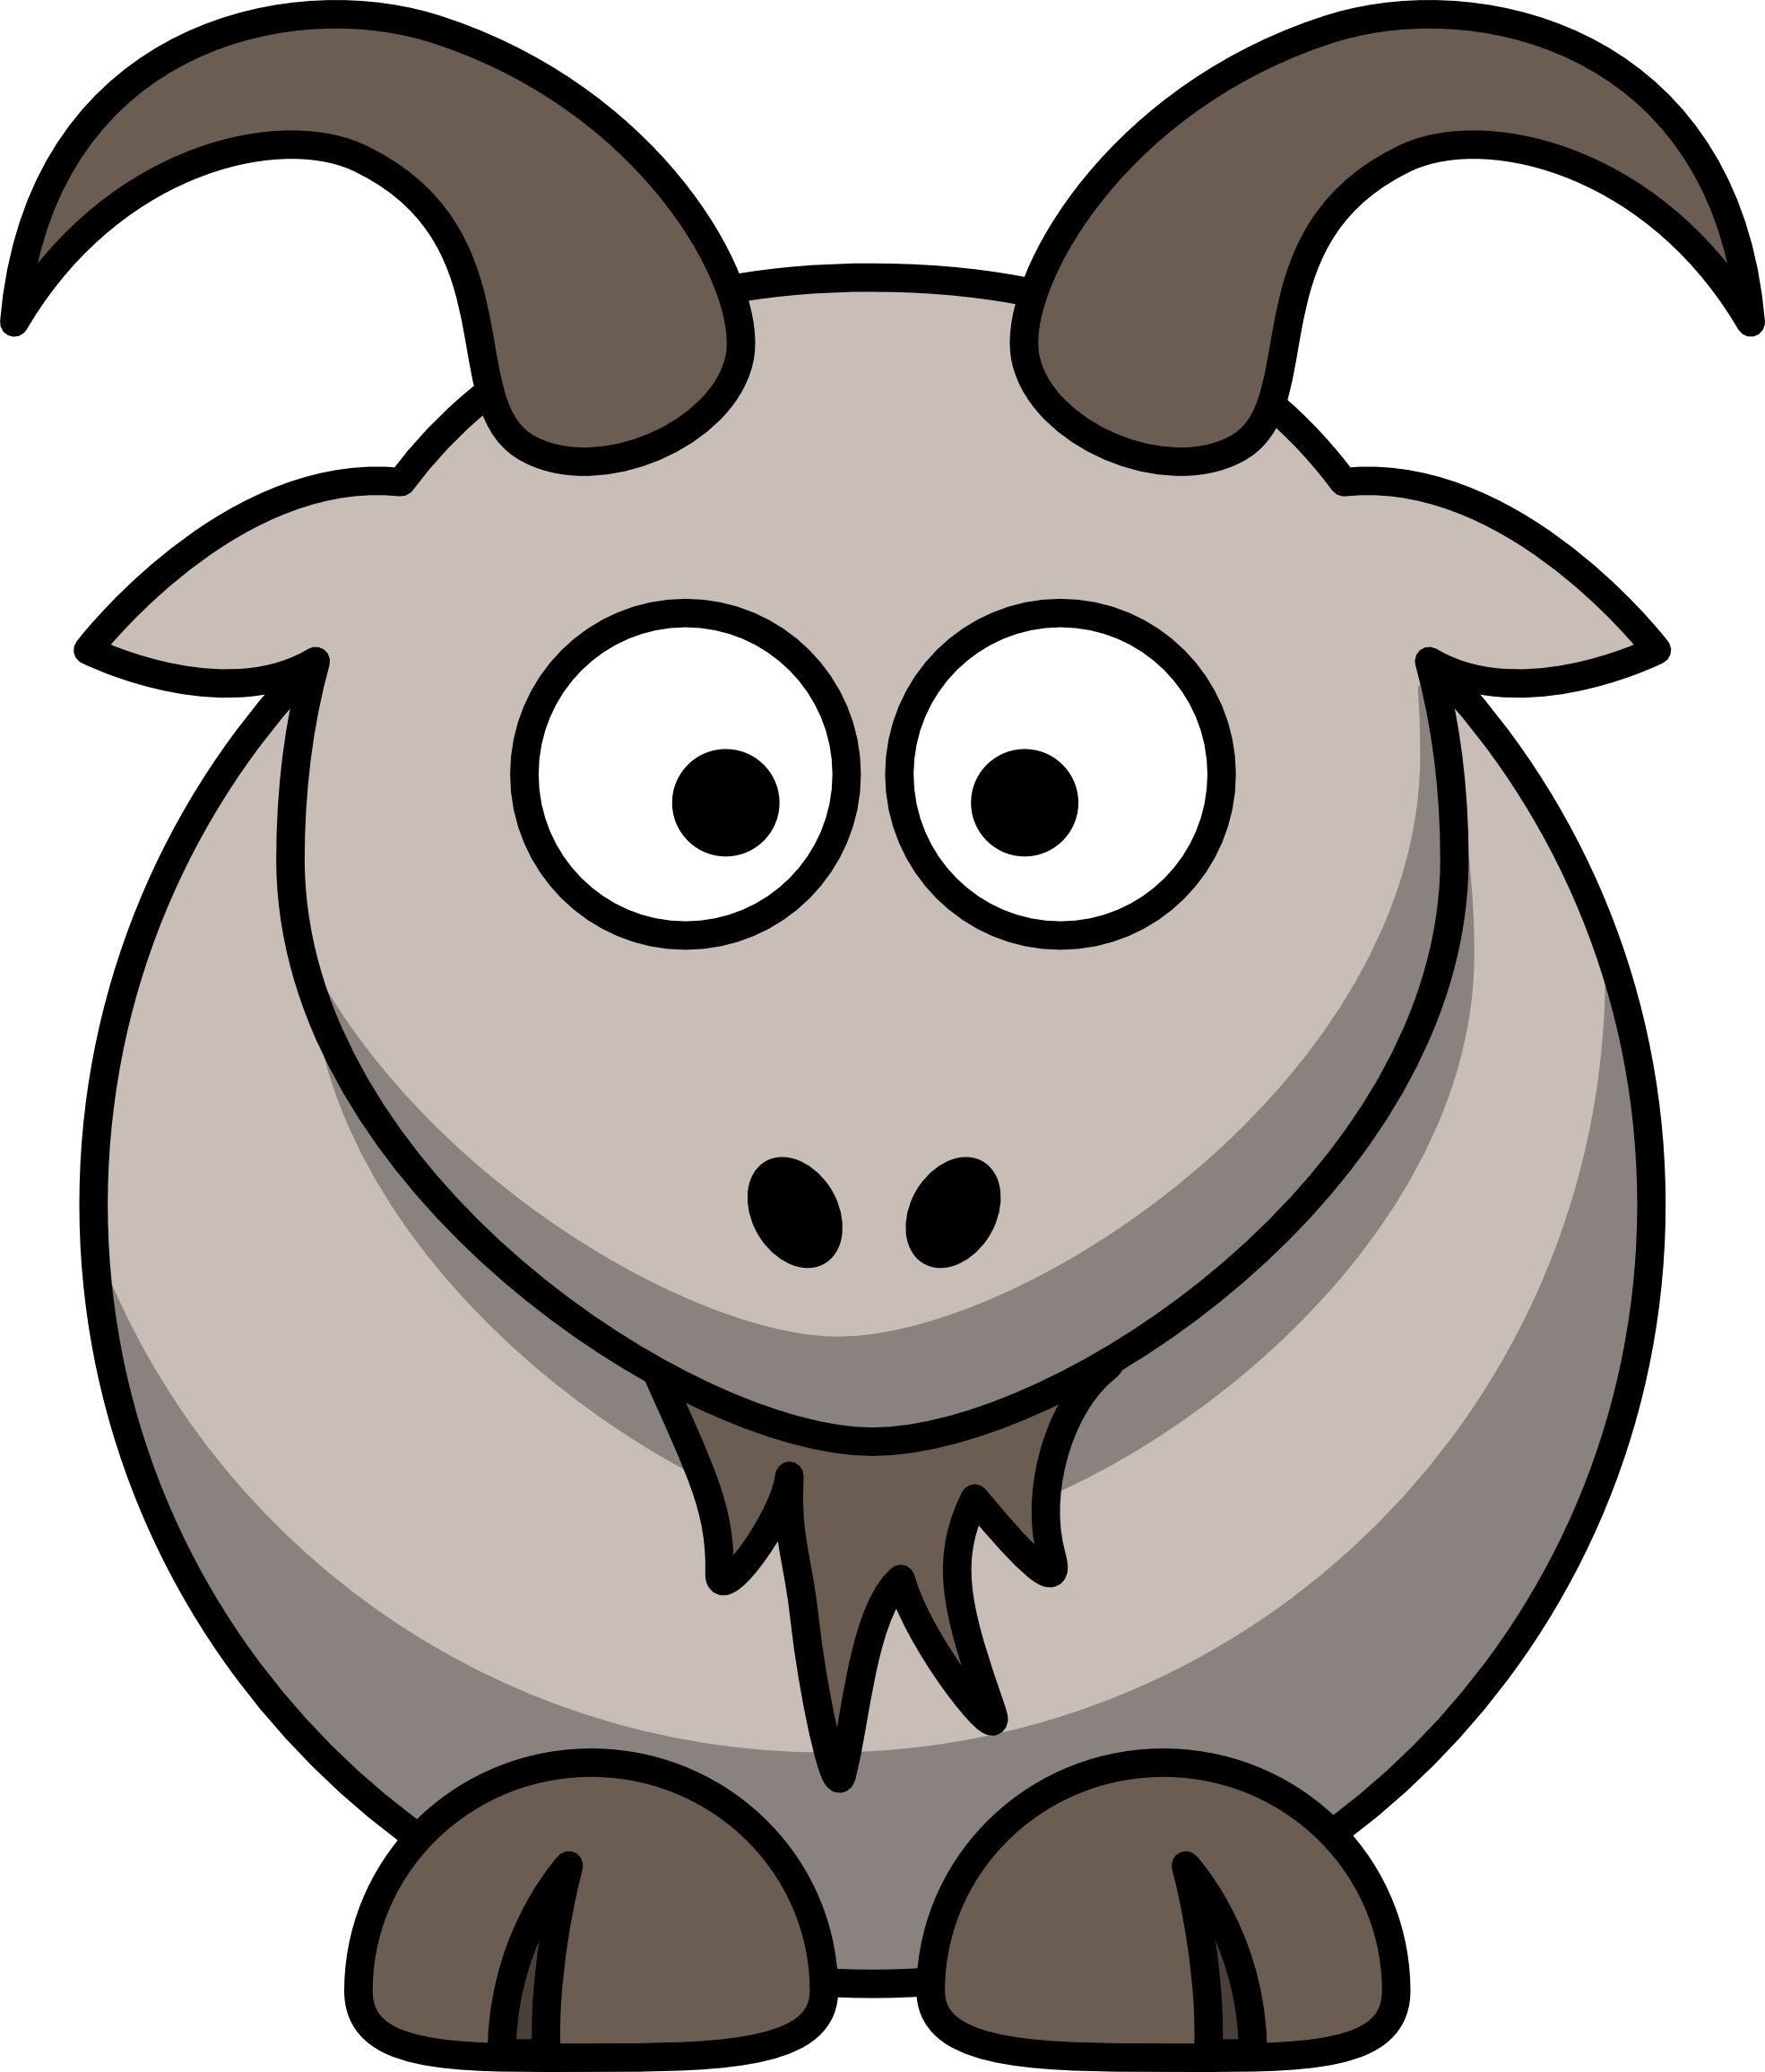 Clipart goat toon. Panda free images